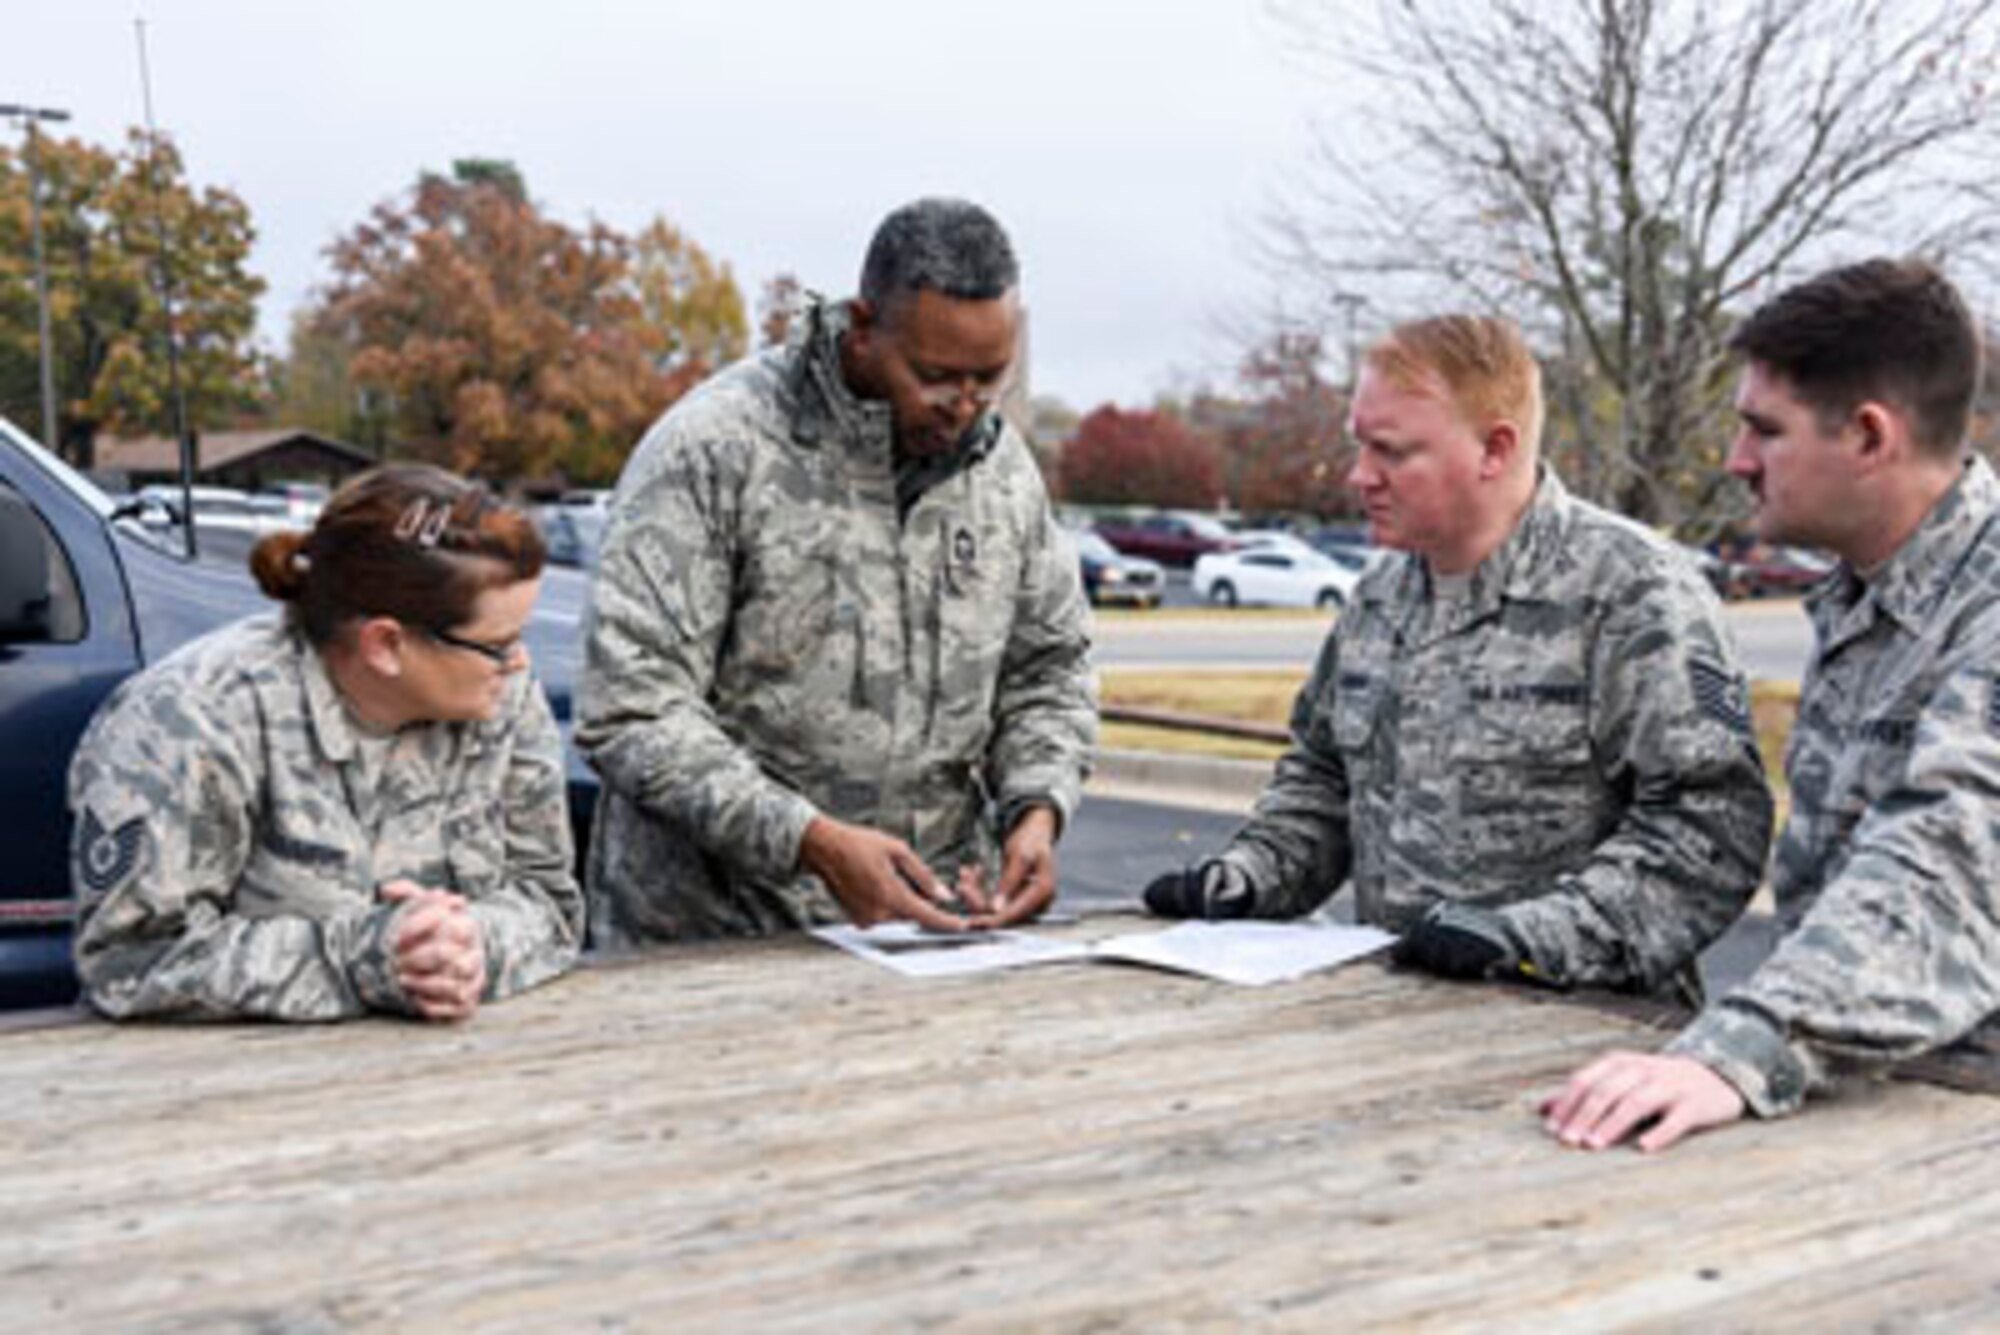 Chief Master Sgt. Kenneth Fisher, the 189th Logistics Readiness Squadron vehicle maintenance manager runs through plans with members of the Rapid Augmentation Team during a R.A.T. load drill Nov. 29, 2016, at Little Rock Air Force Base, Ark. Coordination and proper planning are key elements to the success of the R.A.T. convoy during state emergencies. (U.S. Air National Guard photo by Tech. Sgt. Jessica Condit)